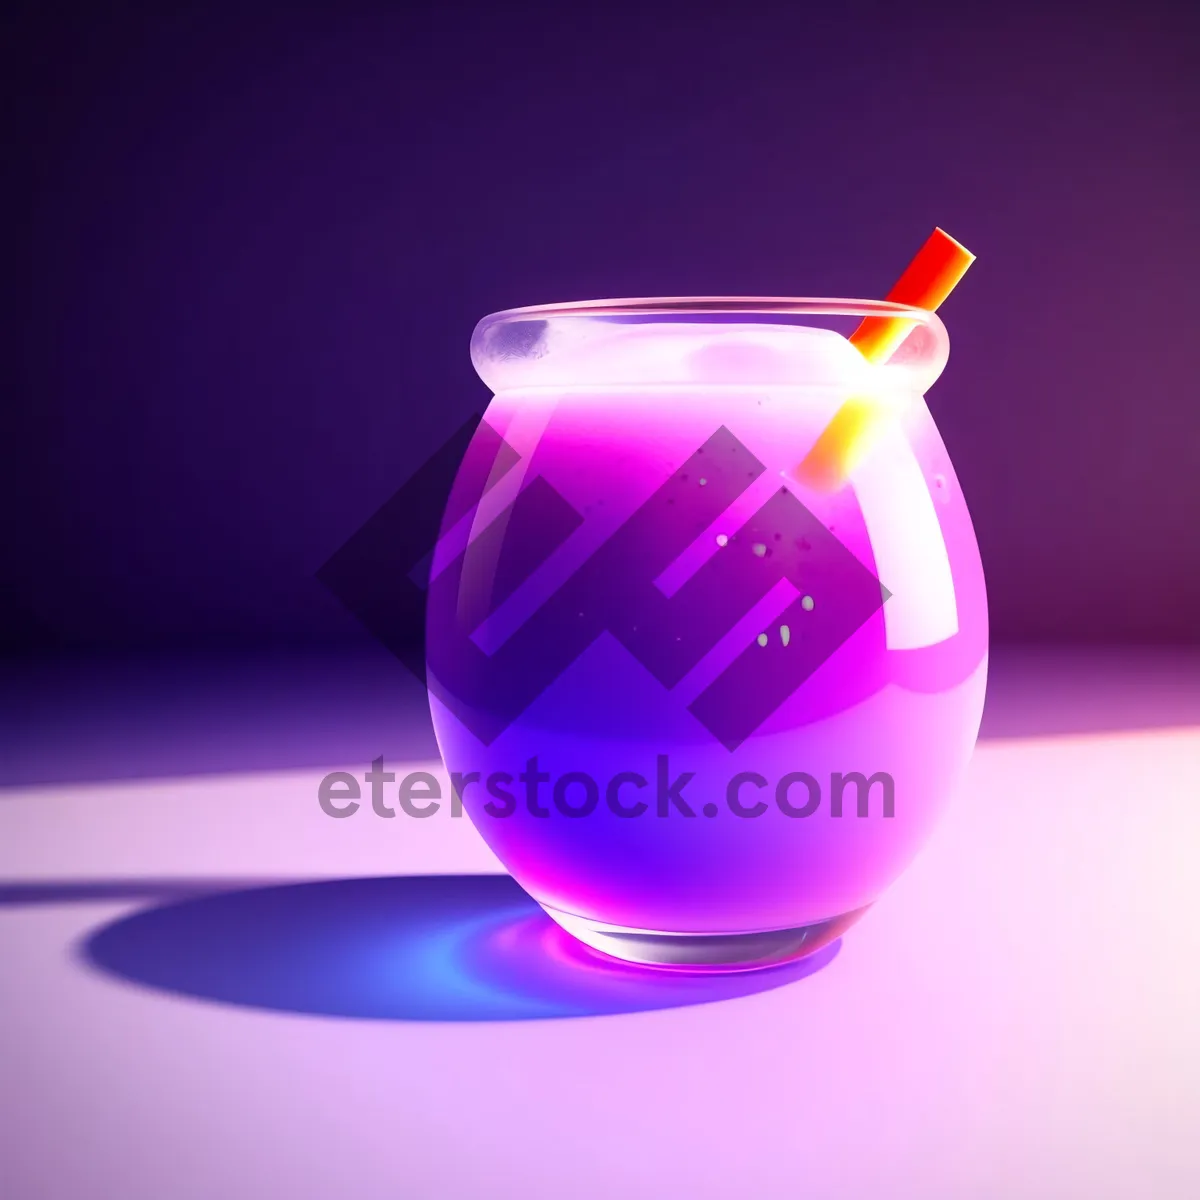 Picture of Refreshing Tea Cup - Beverage in Glass Container